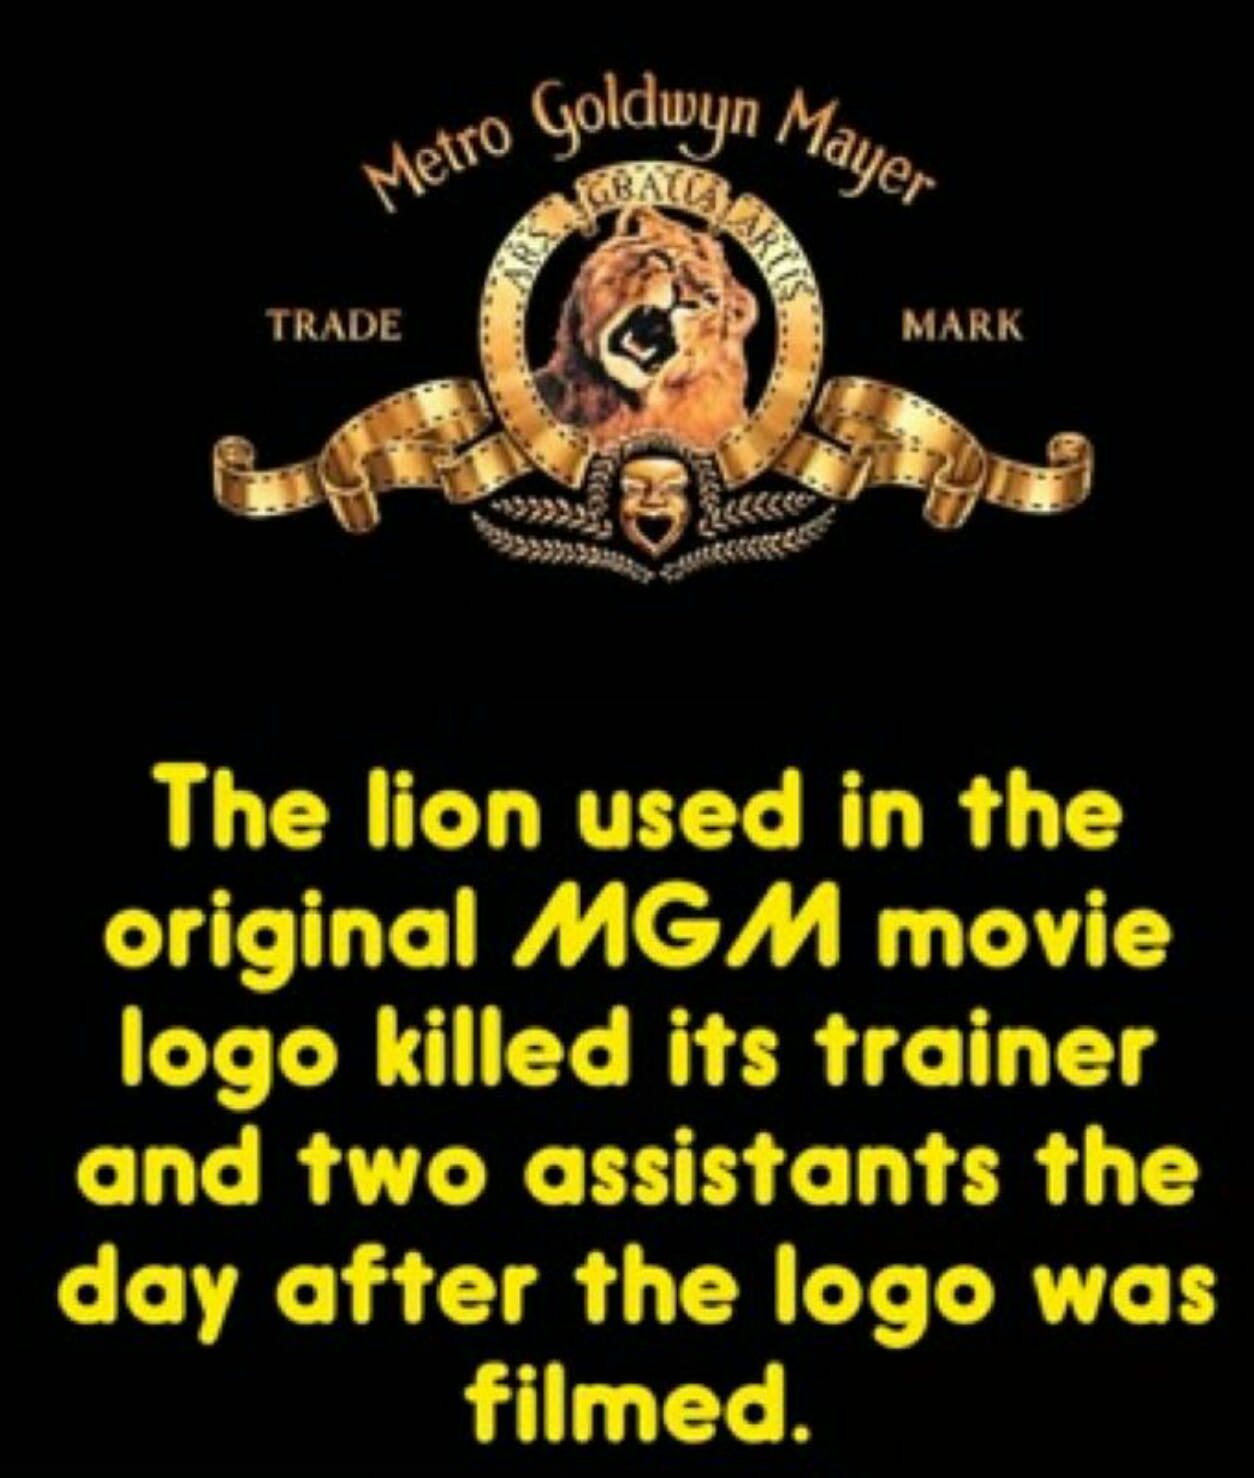 metro goldwyn mayer movies - Goldwyn Mayer Metro Gold Gbac, Rtis Trade Mark The lion used in the original Mgm movie logo killed its trainer and two assistants the day after the logo was filmed.